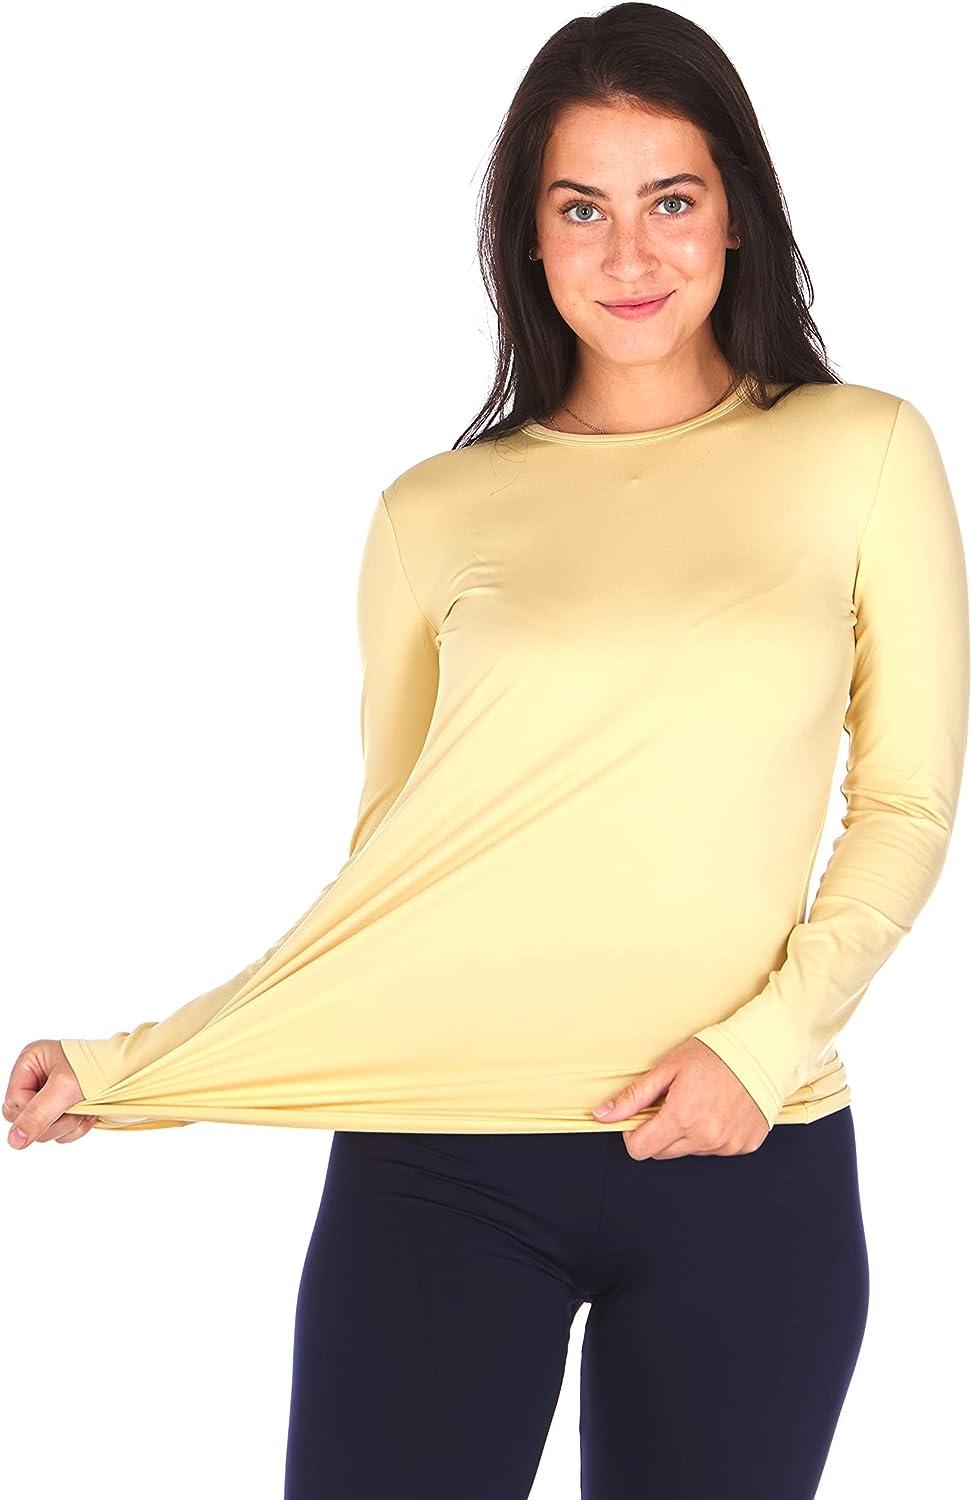 Thermajane Thermal Shirts for Women Long Sleeve Tops Winter